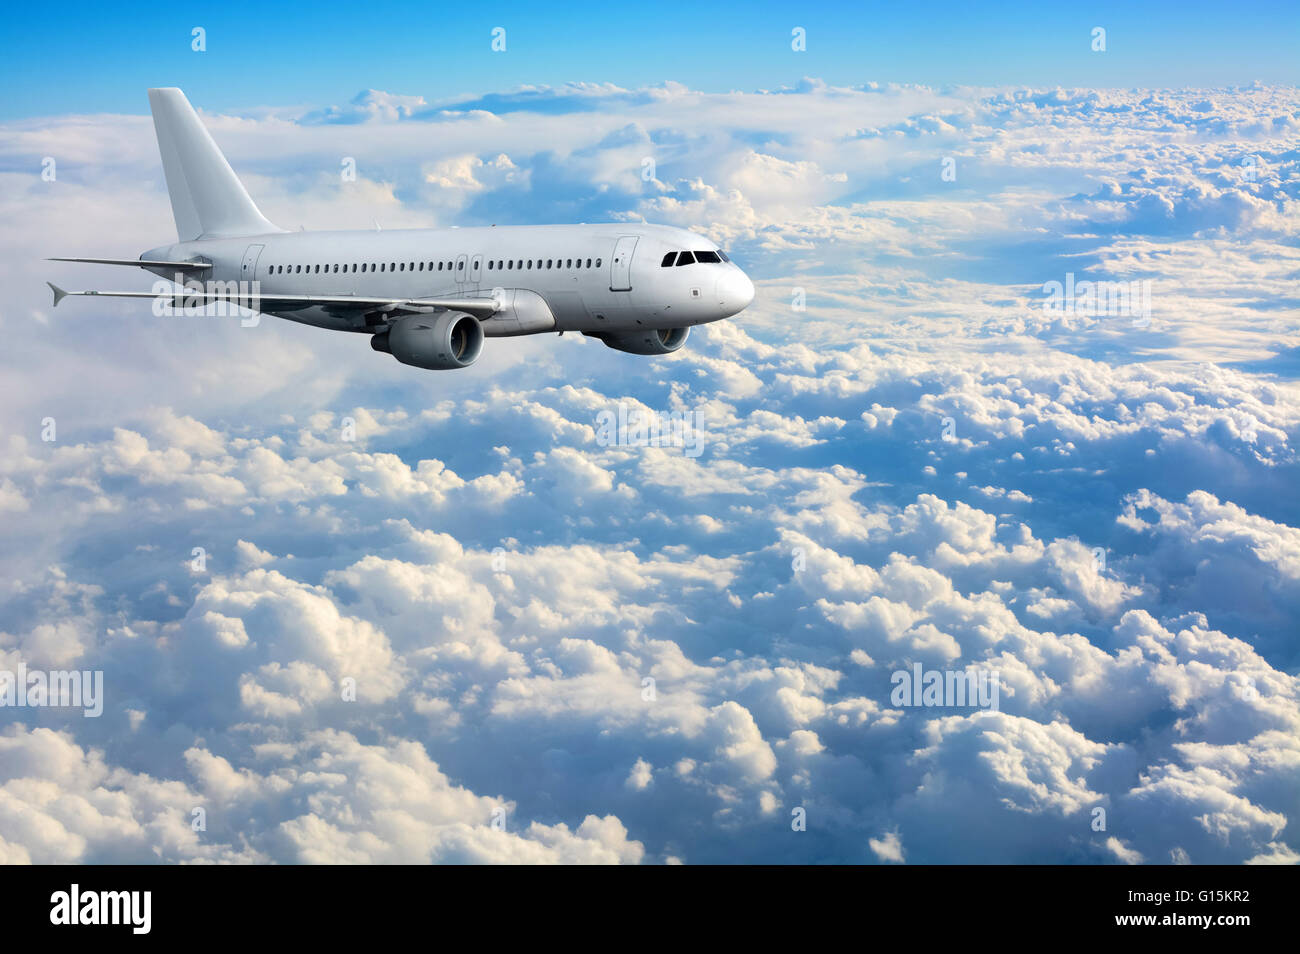 Commercial passenger plane flying above clouds Stock Photo